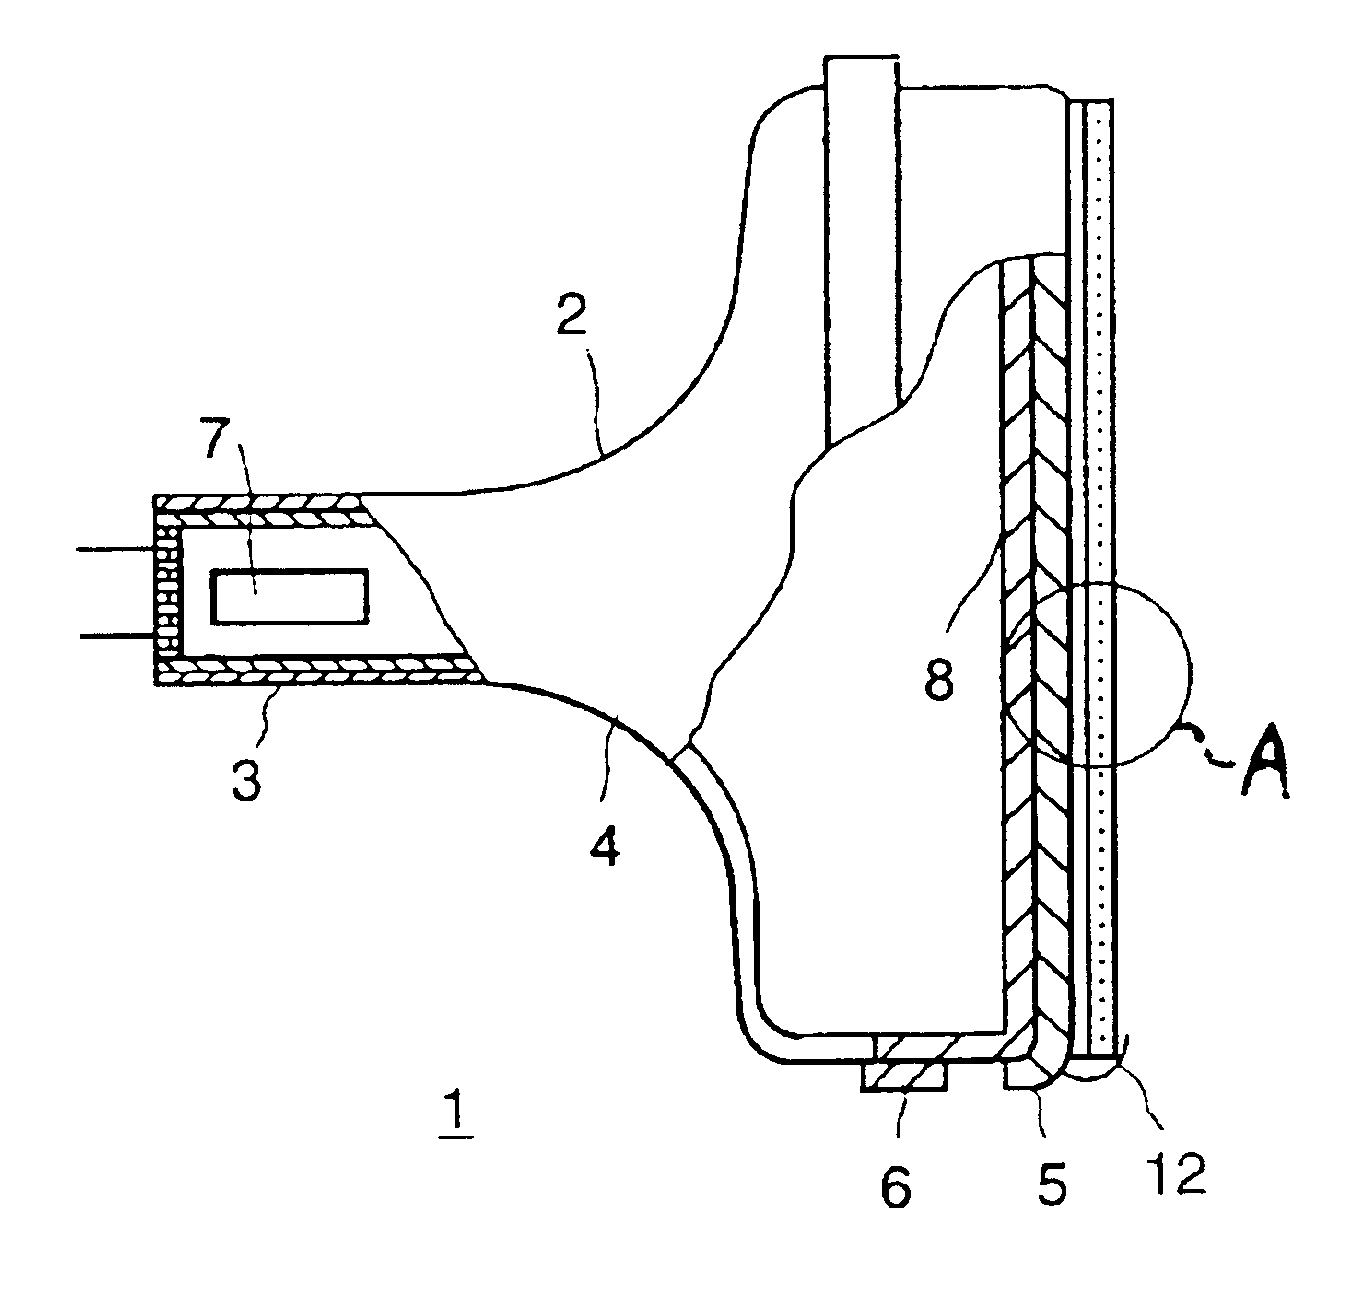 Display apparatus with a multi-layer absorption, conduction and protection film